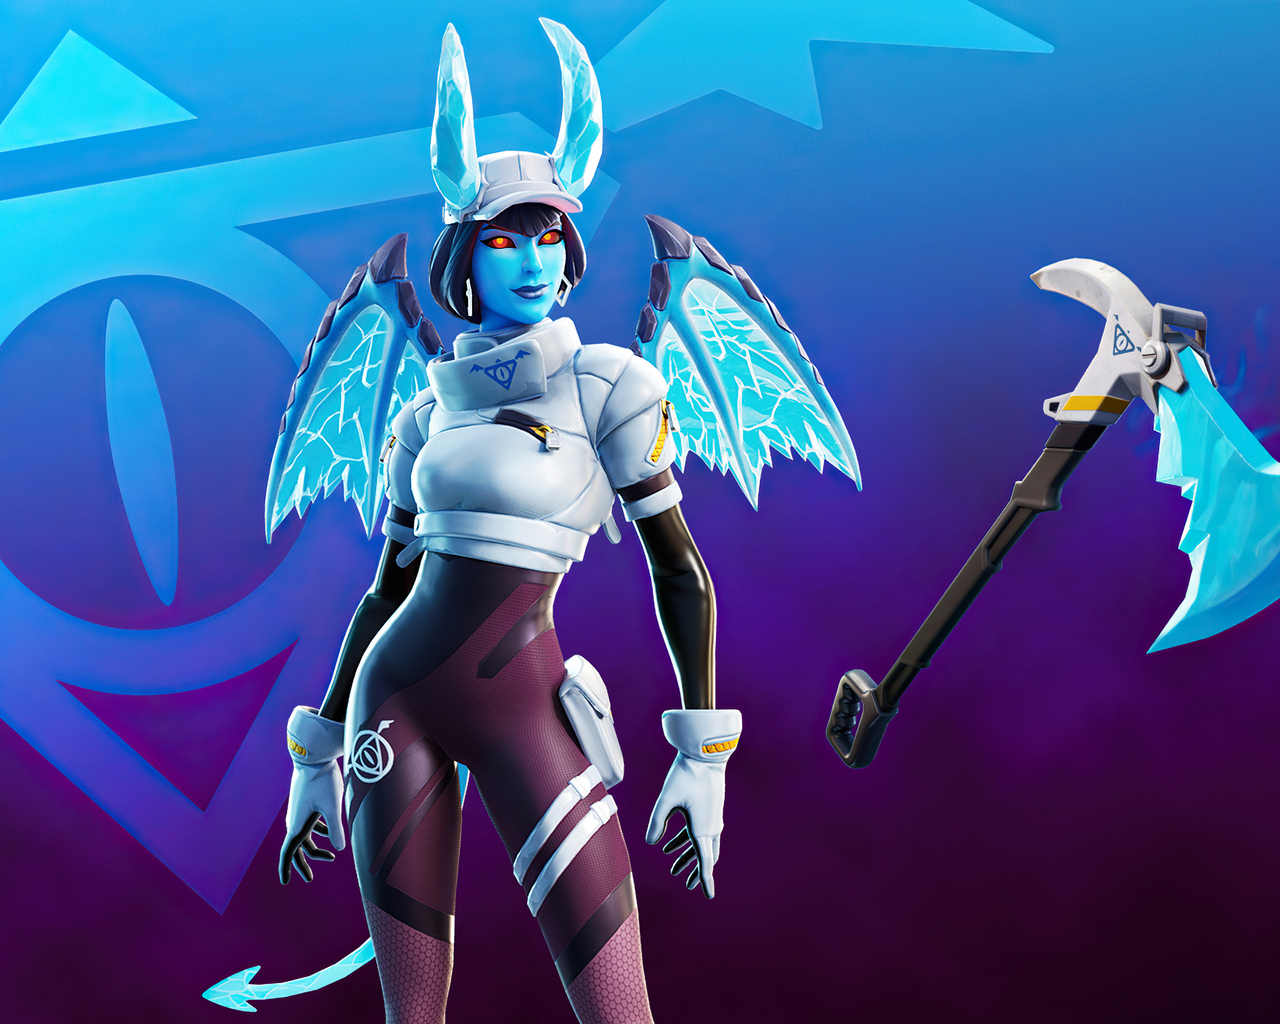 Shiver Fortnite Wallpapers